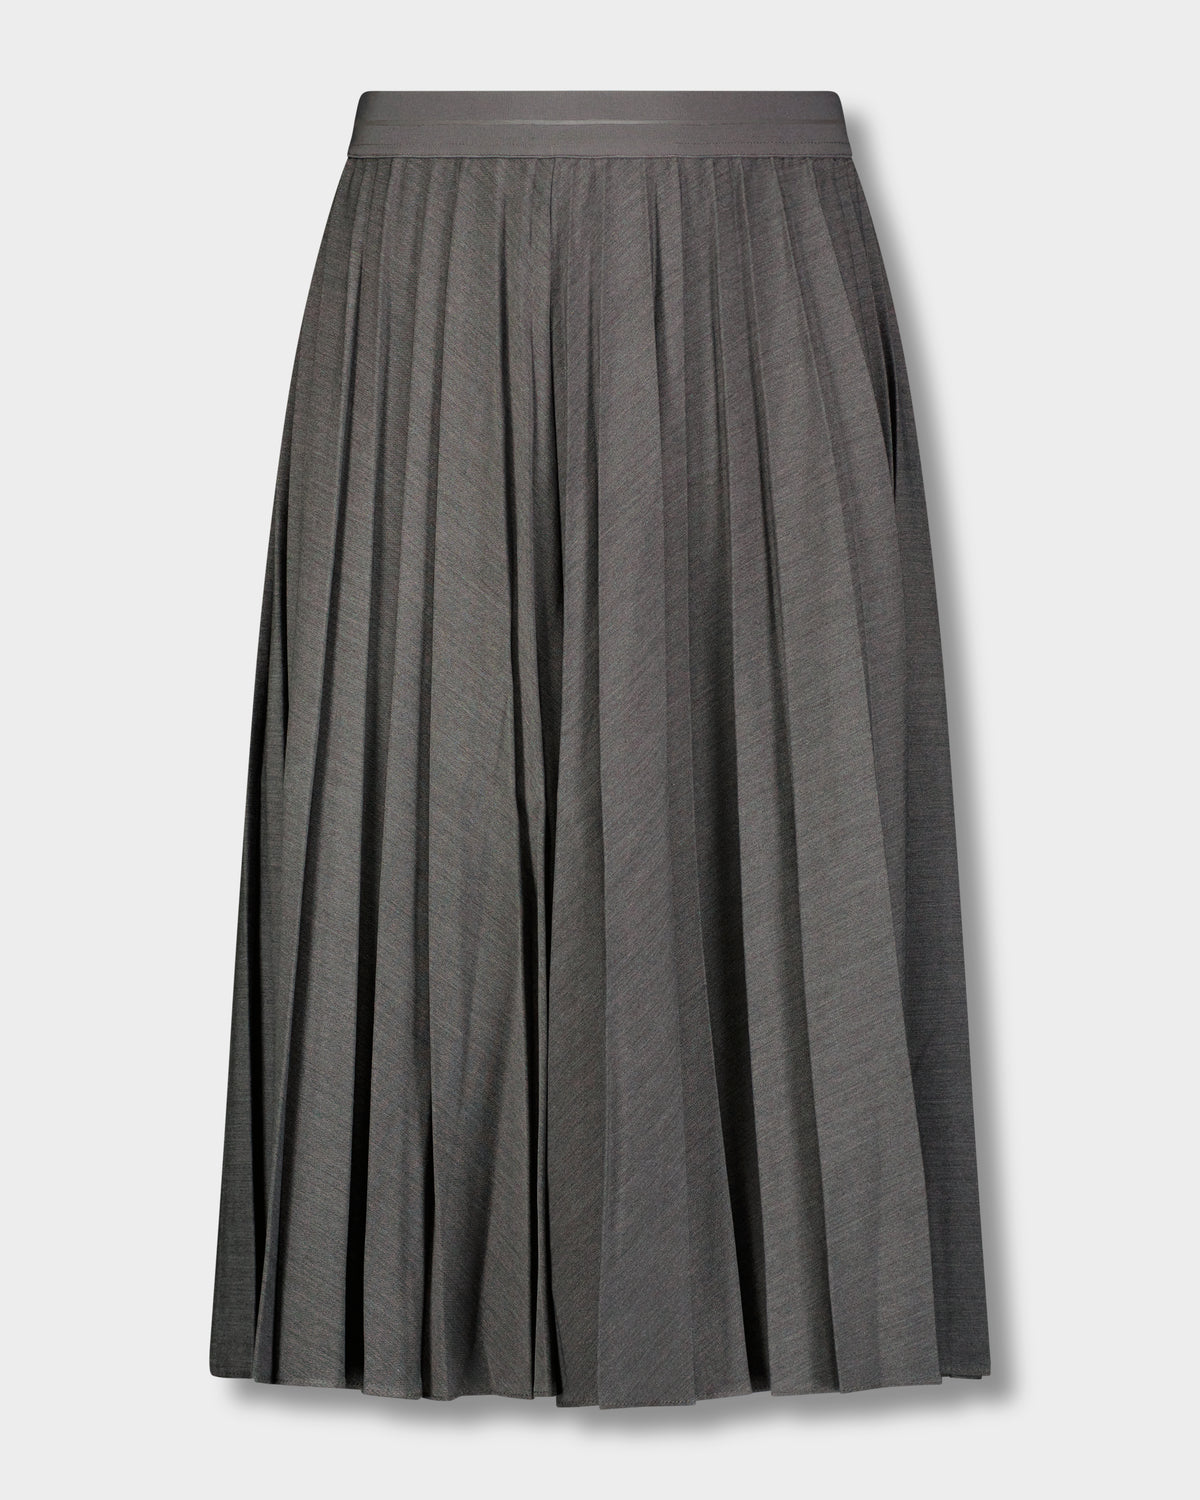 PLEATED SKIRT 27"-CHARCOAL GREY